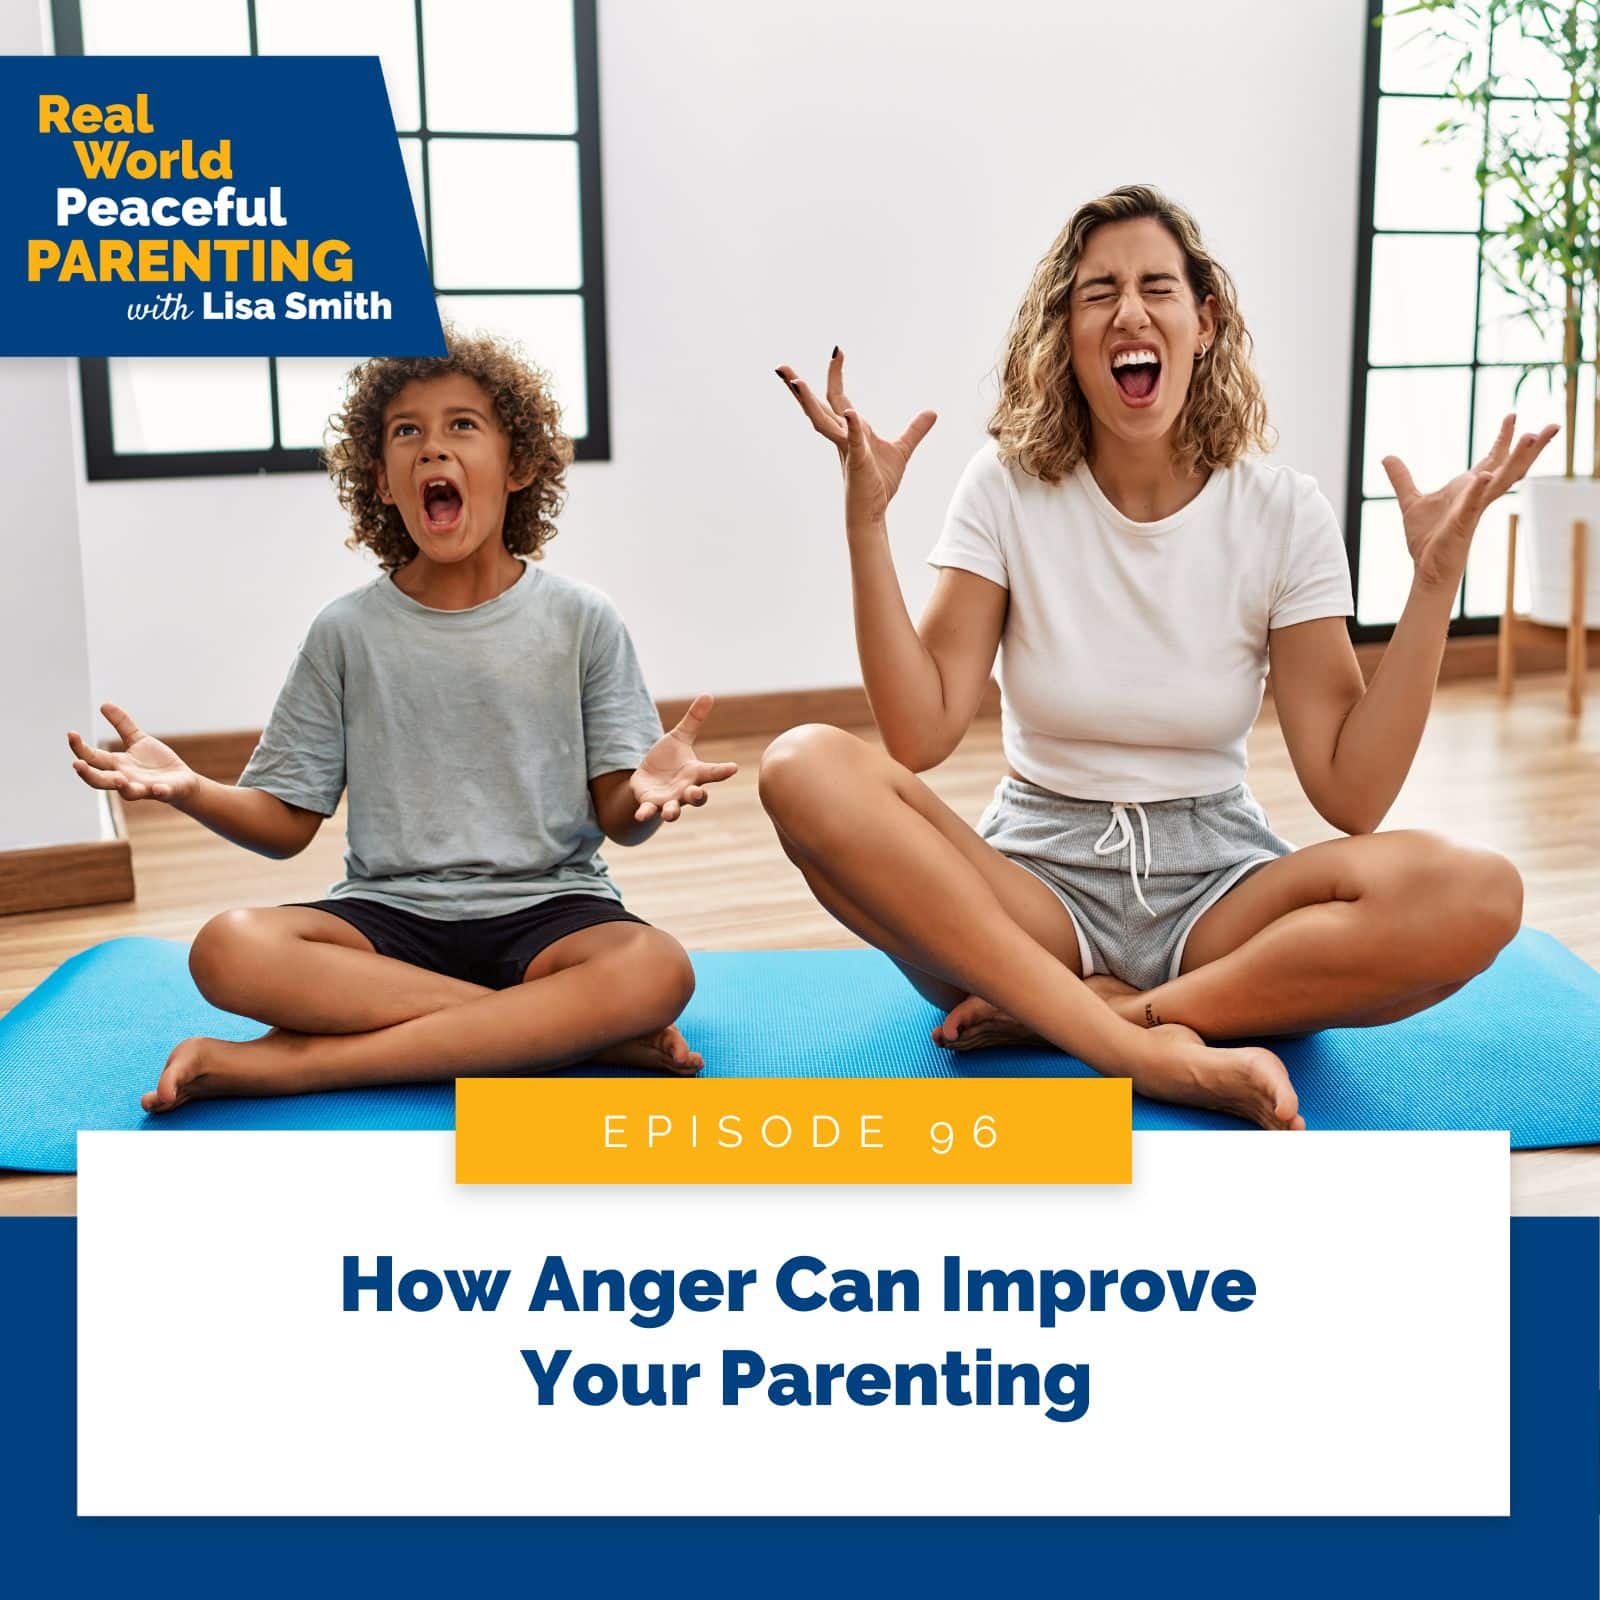 Real World Peaceful Parenting with Lisa Smith | How Anger Can Improve Your Parenting